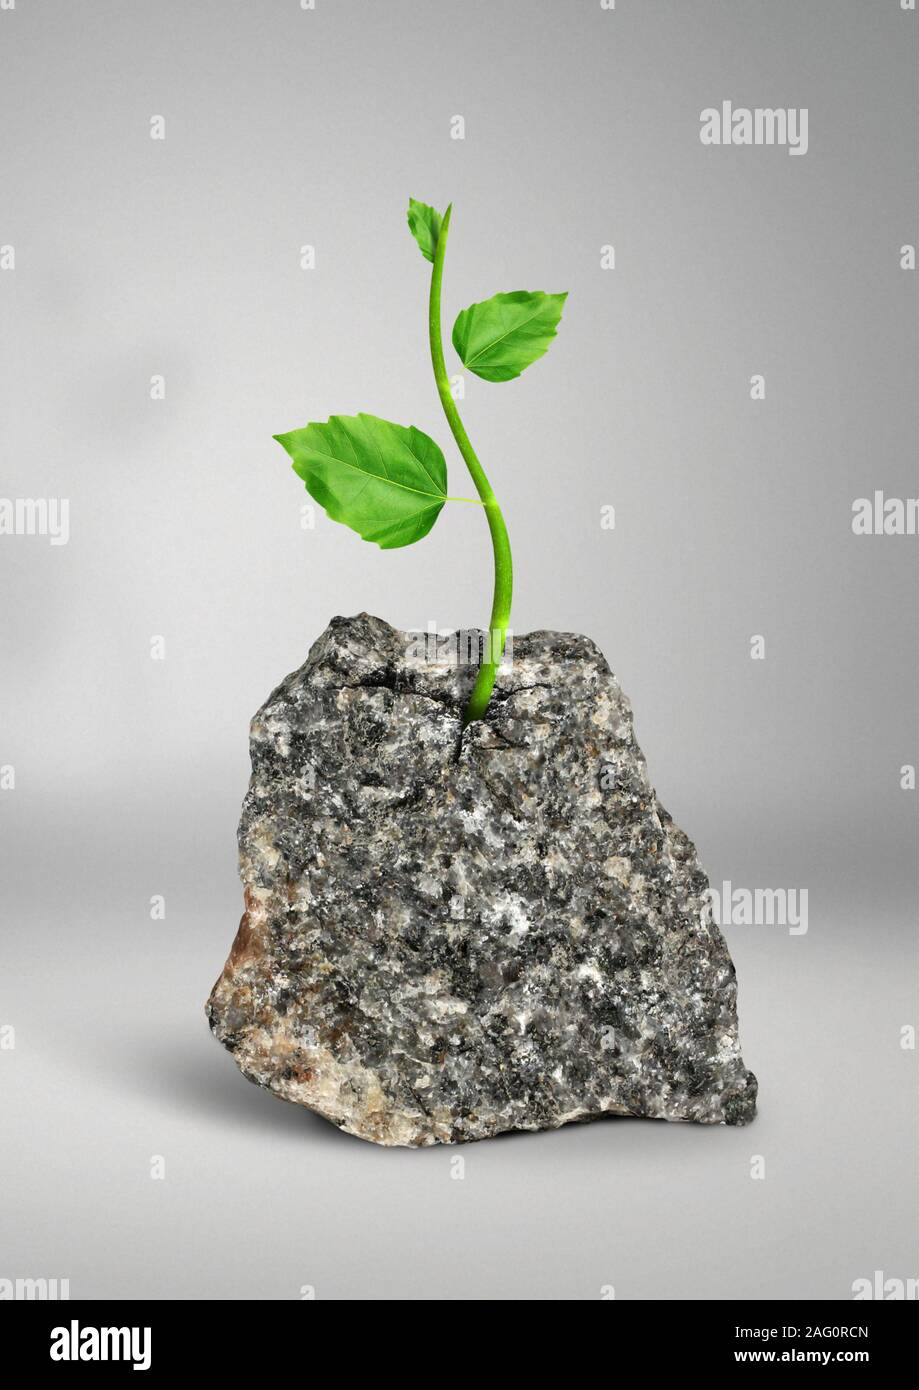 Impossible concept, plant growing in rock Stock Photo